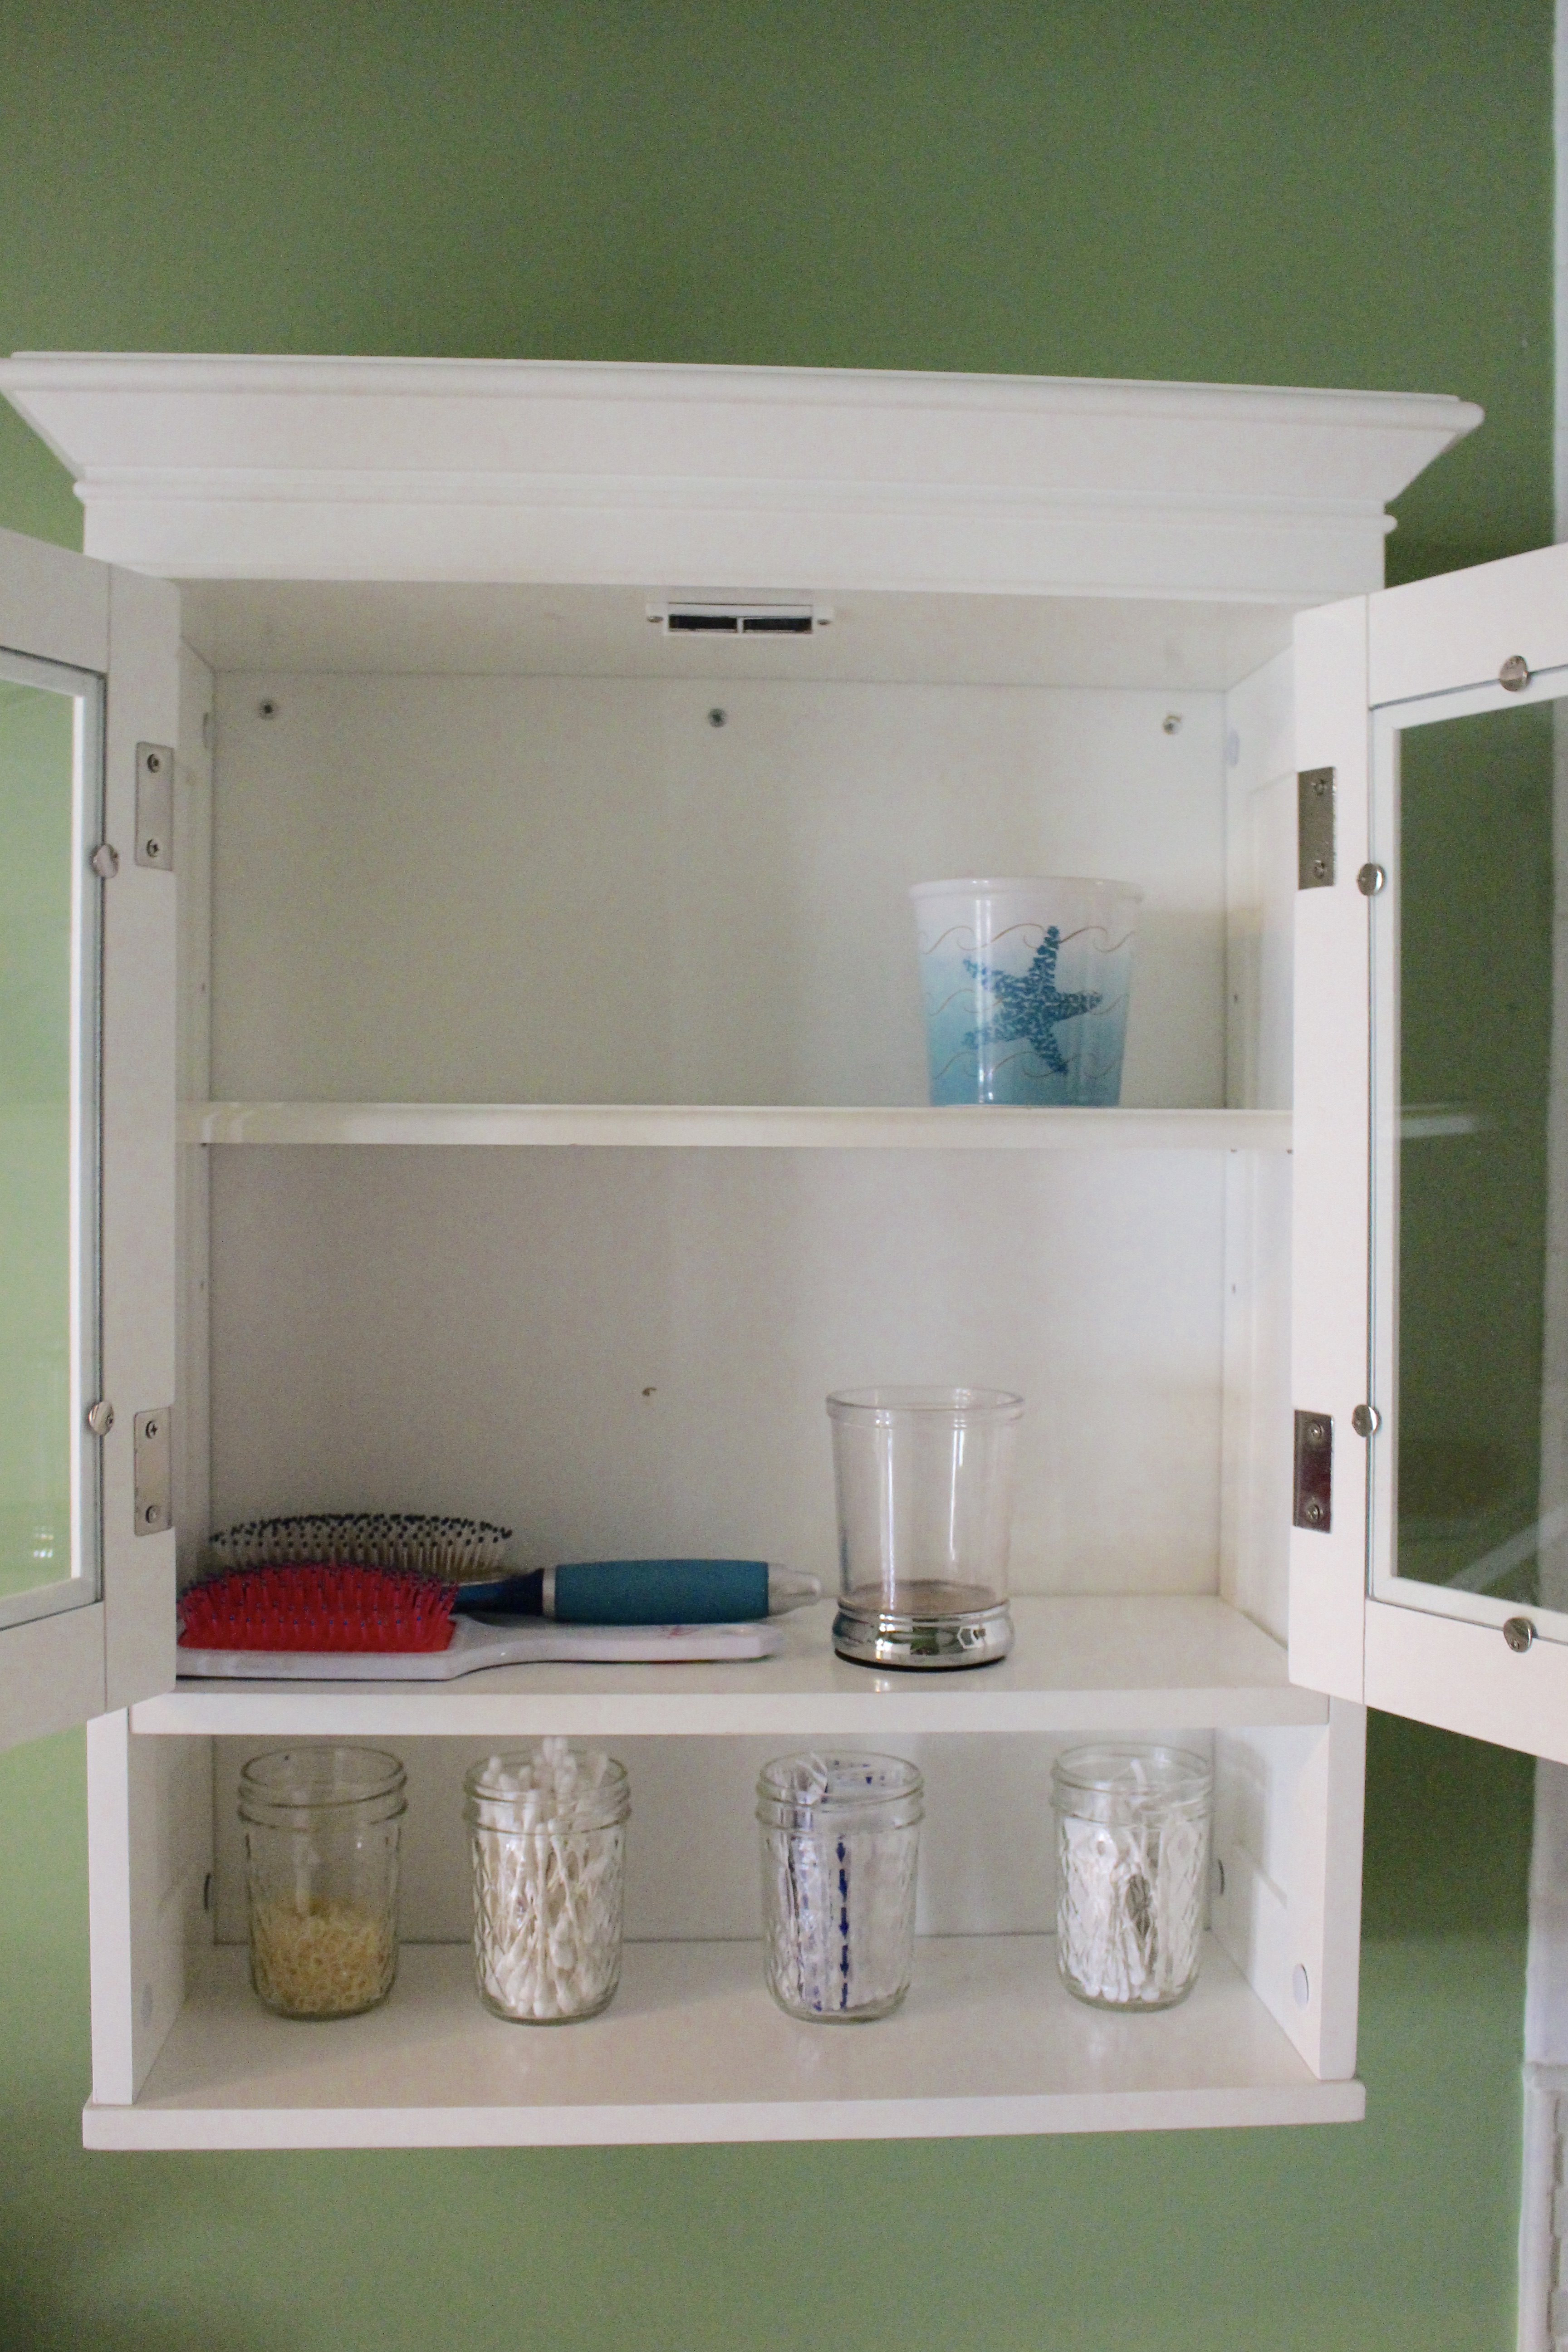 Cabinet Storage Ideas for a Small Bath by www.whitecottagehomeandliving.com